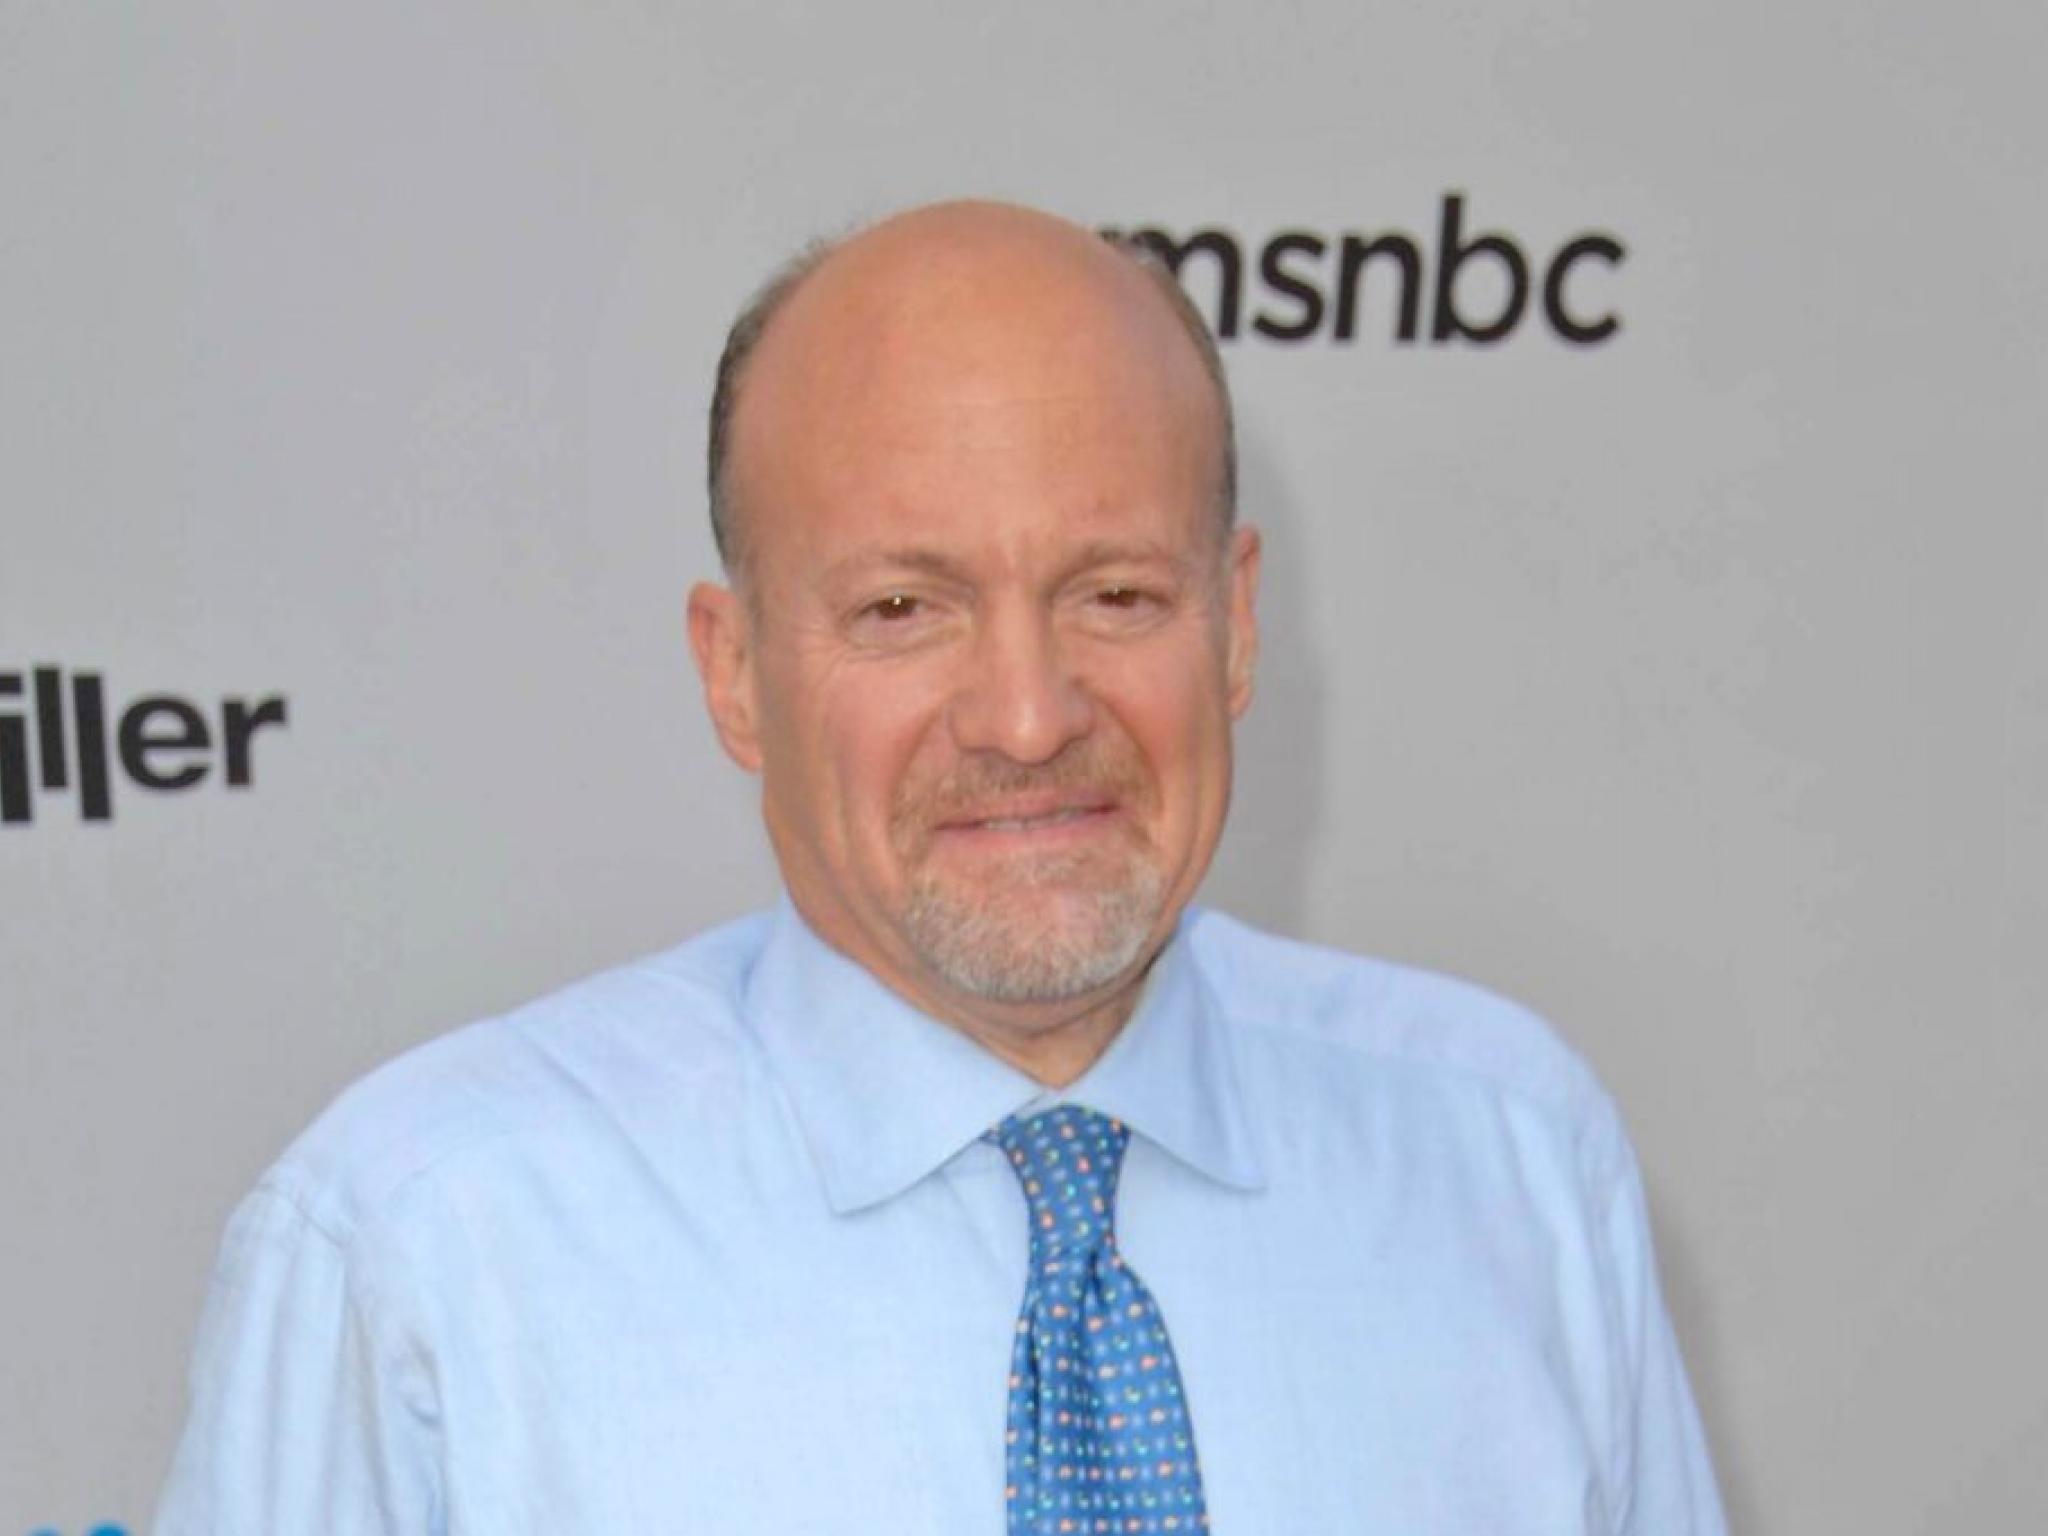  jim-cramer-says-buy-this-tech-stock-right-here-likes-cognex 